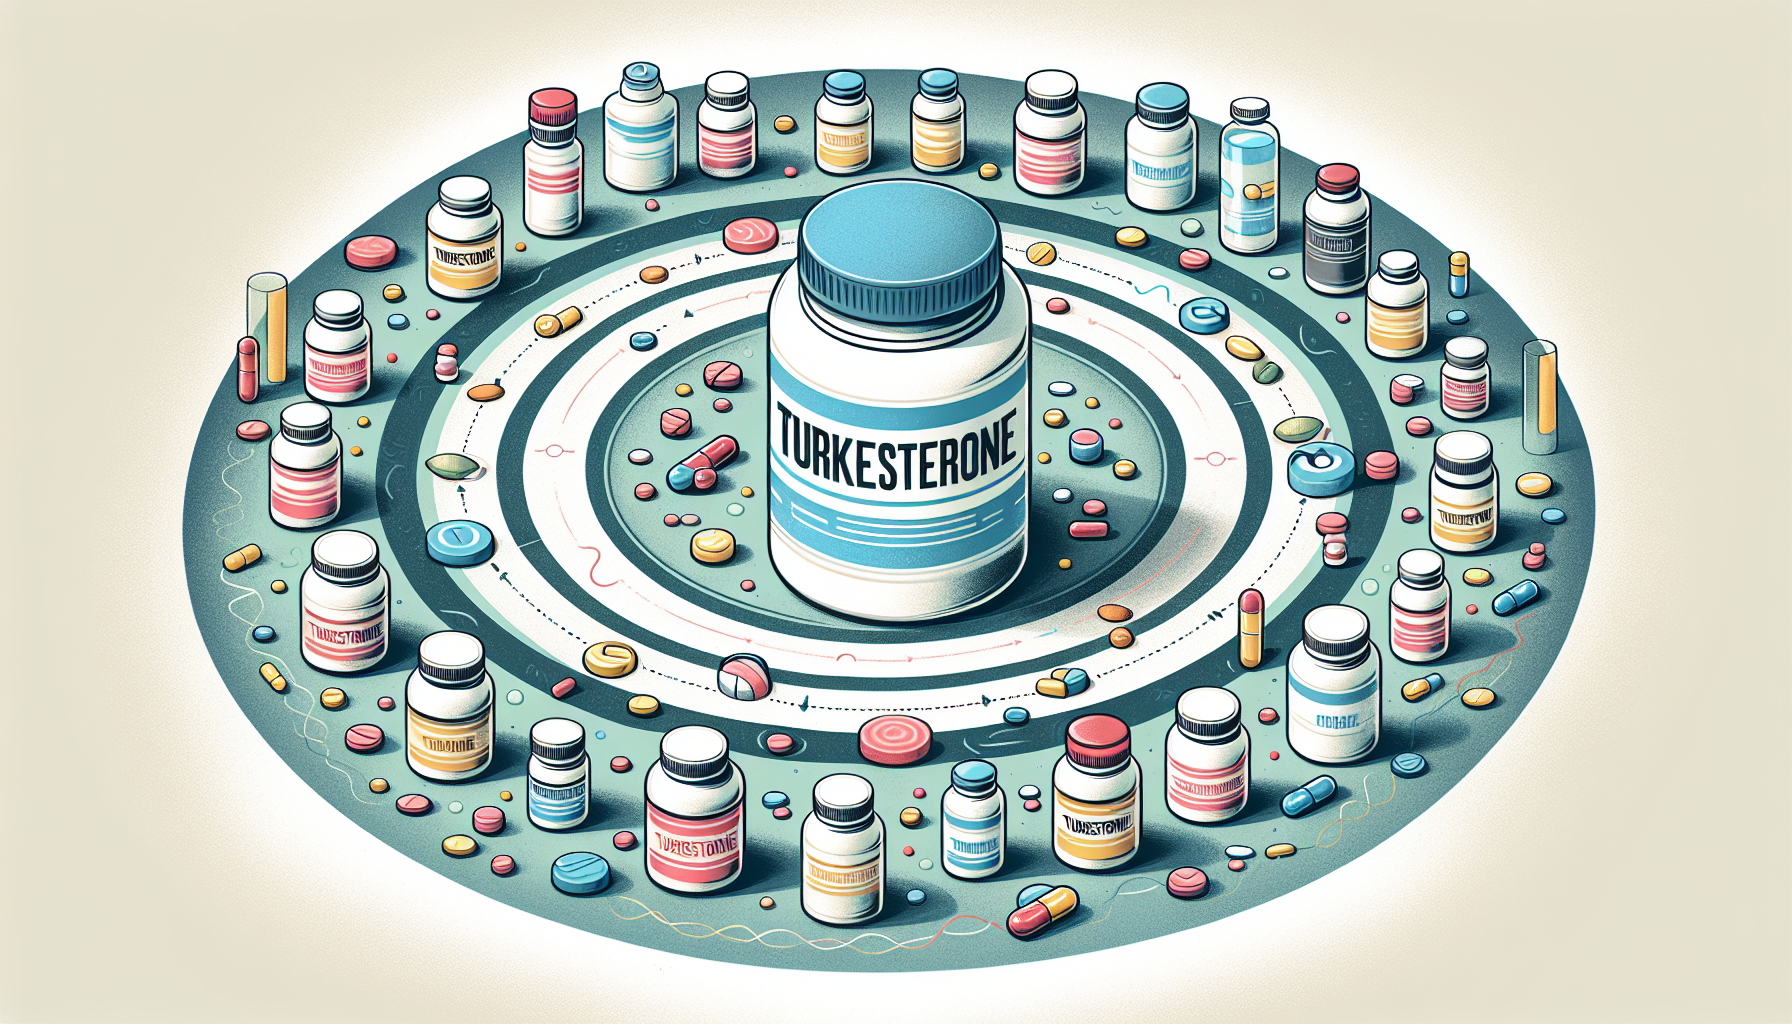 Illustration of turkesterone dosage and stacking